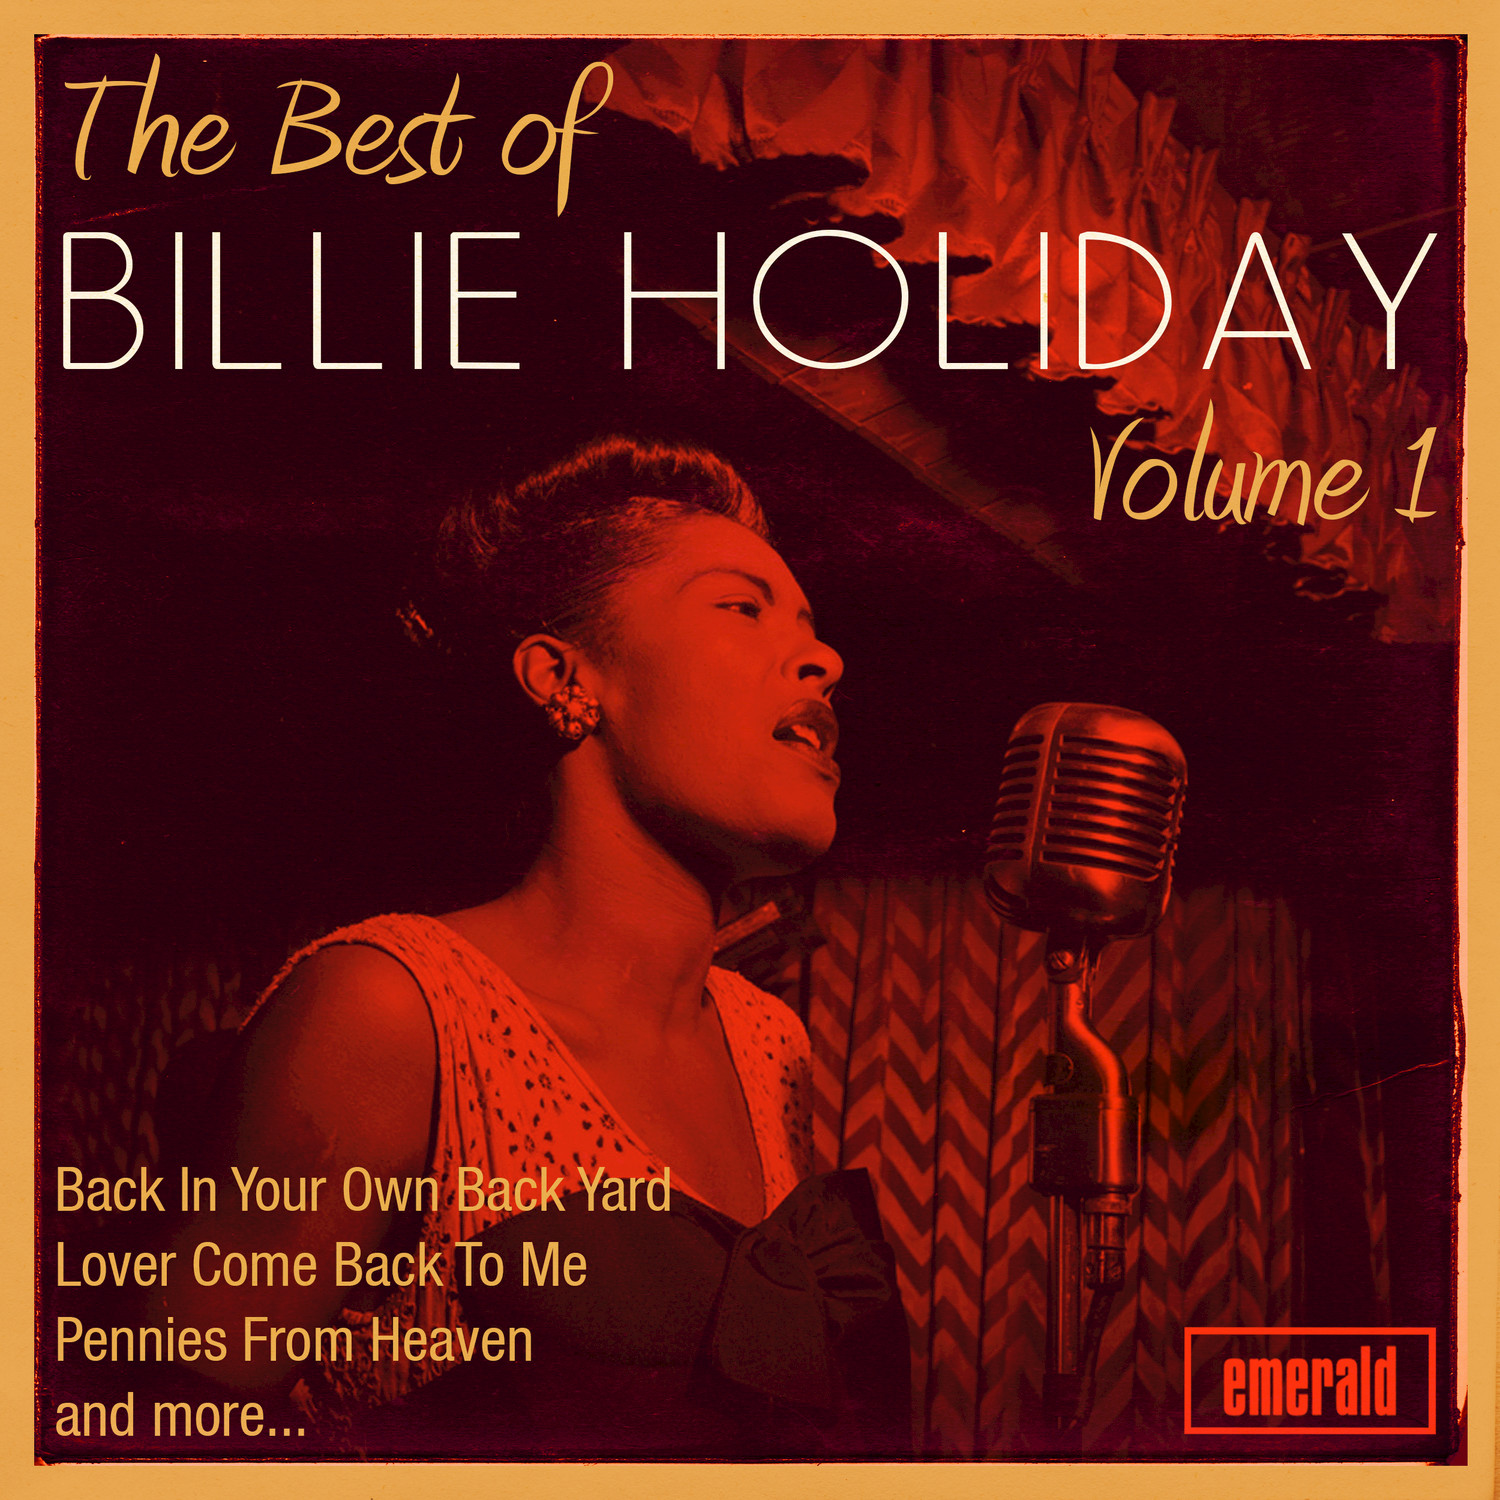 The Best of Billie Holiday, Vol. 1